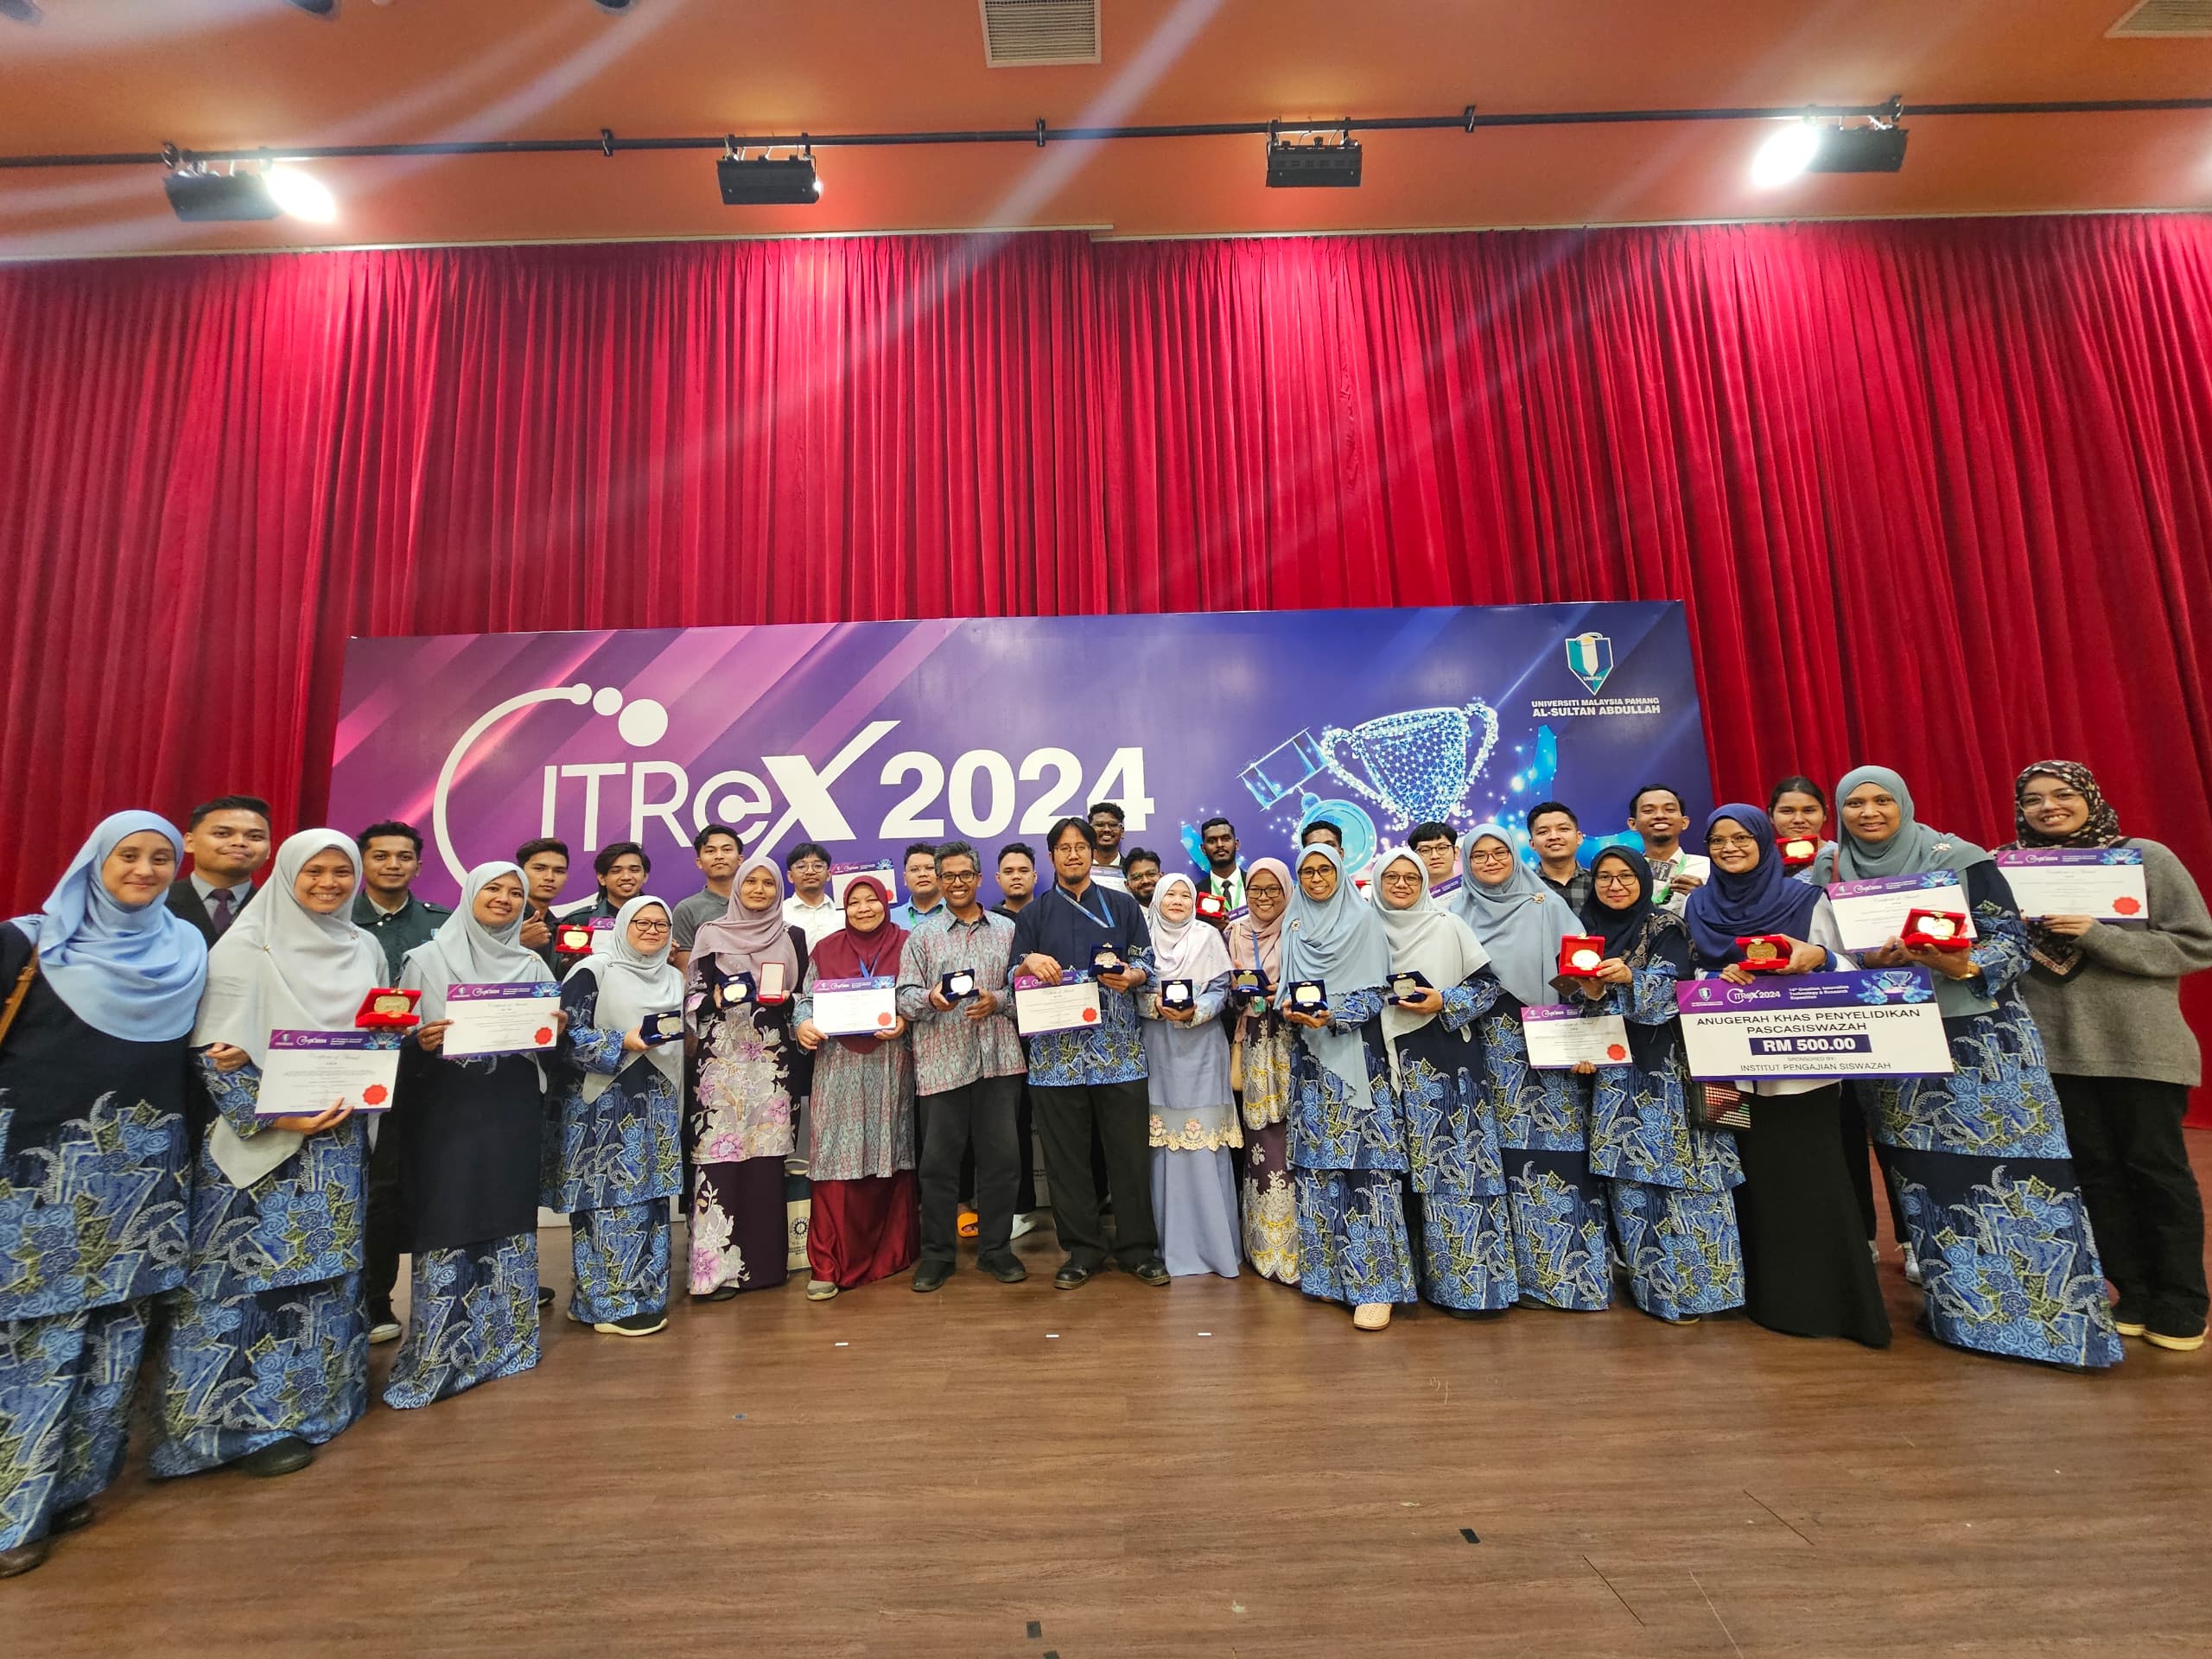 Congratulations to all Citrex 2024 Winners